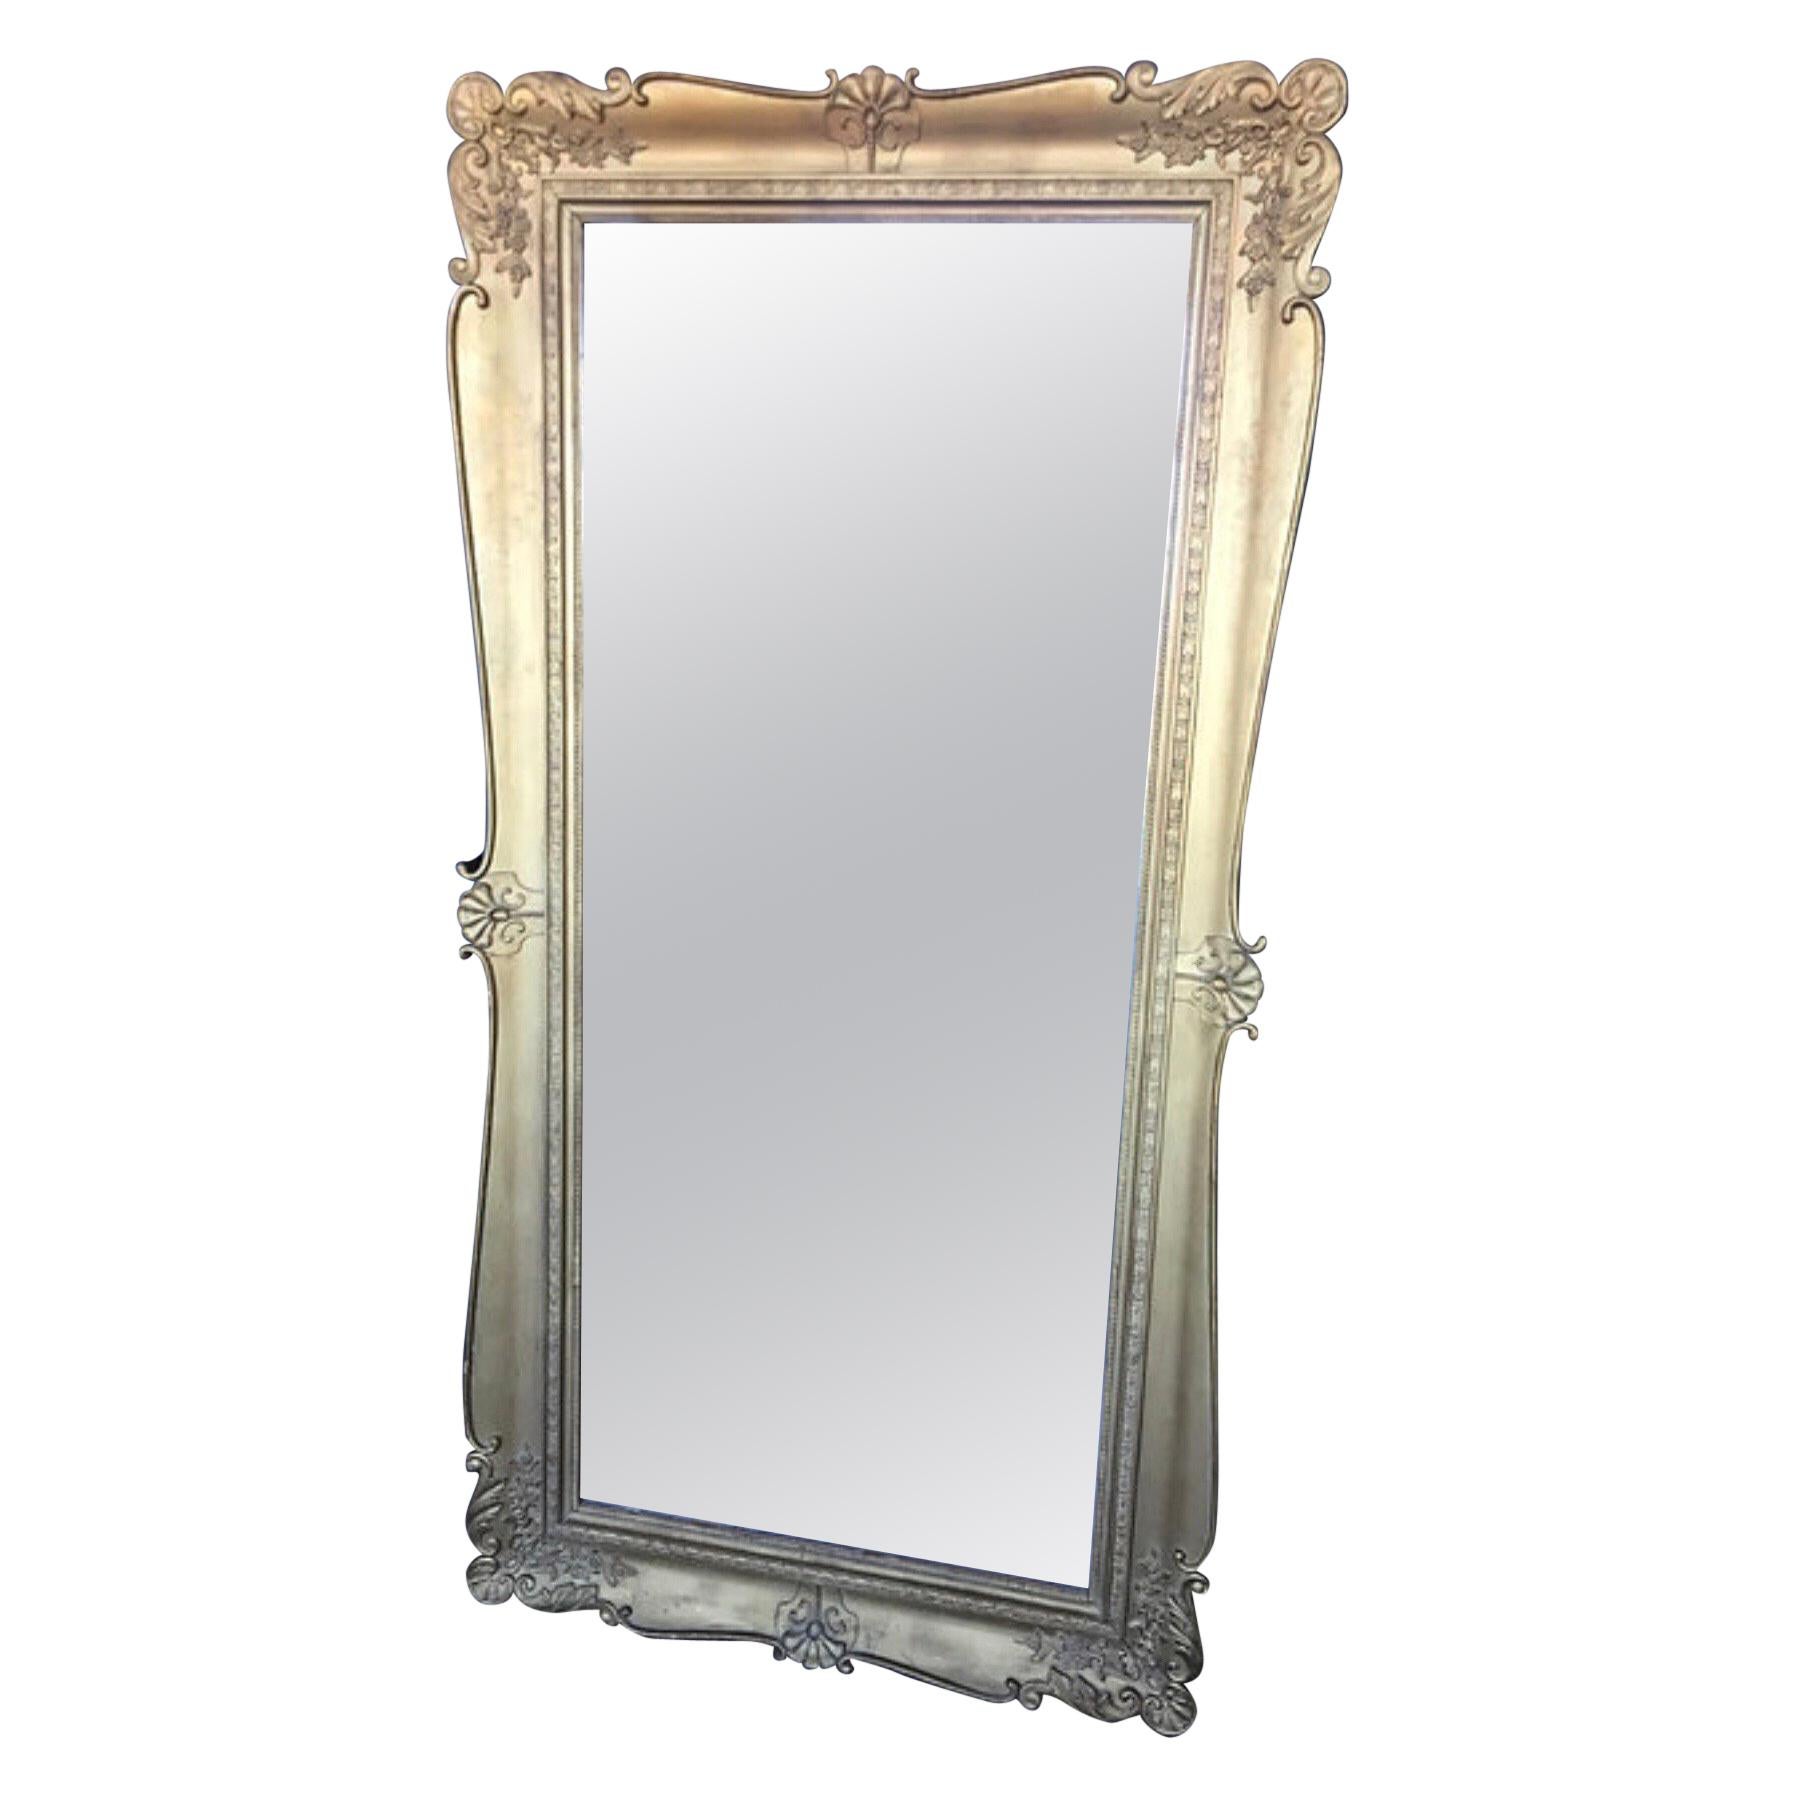 Grand Antique French Baroque Mirror, early 1800s